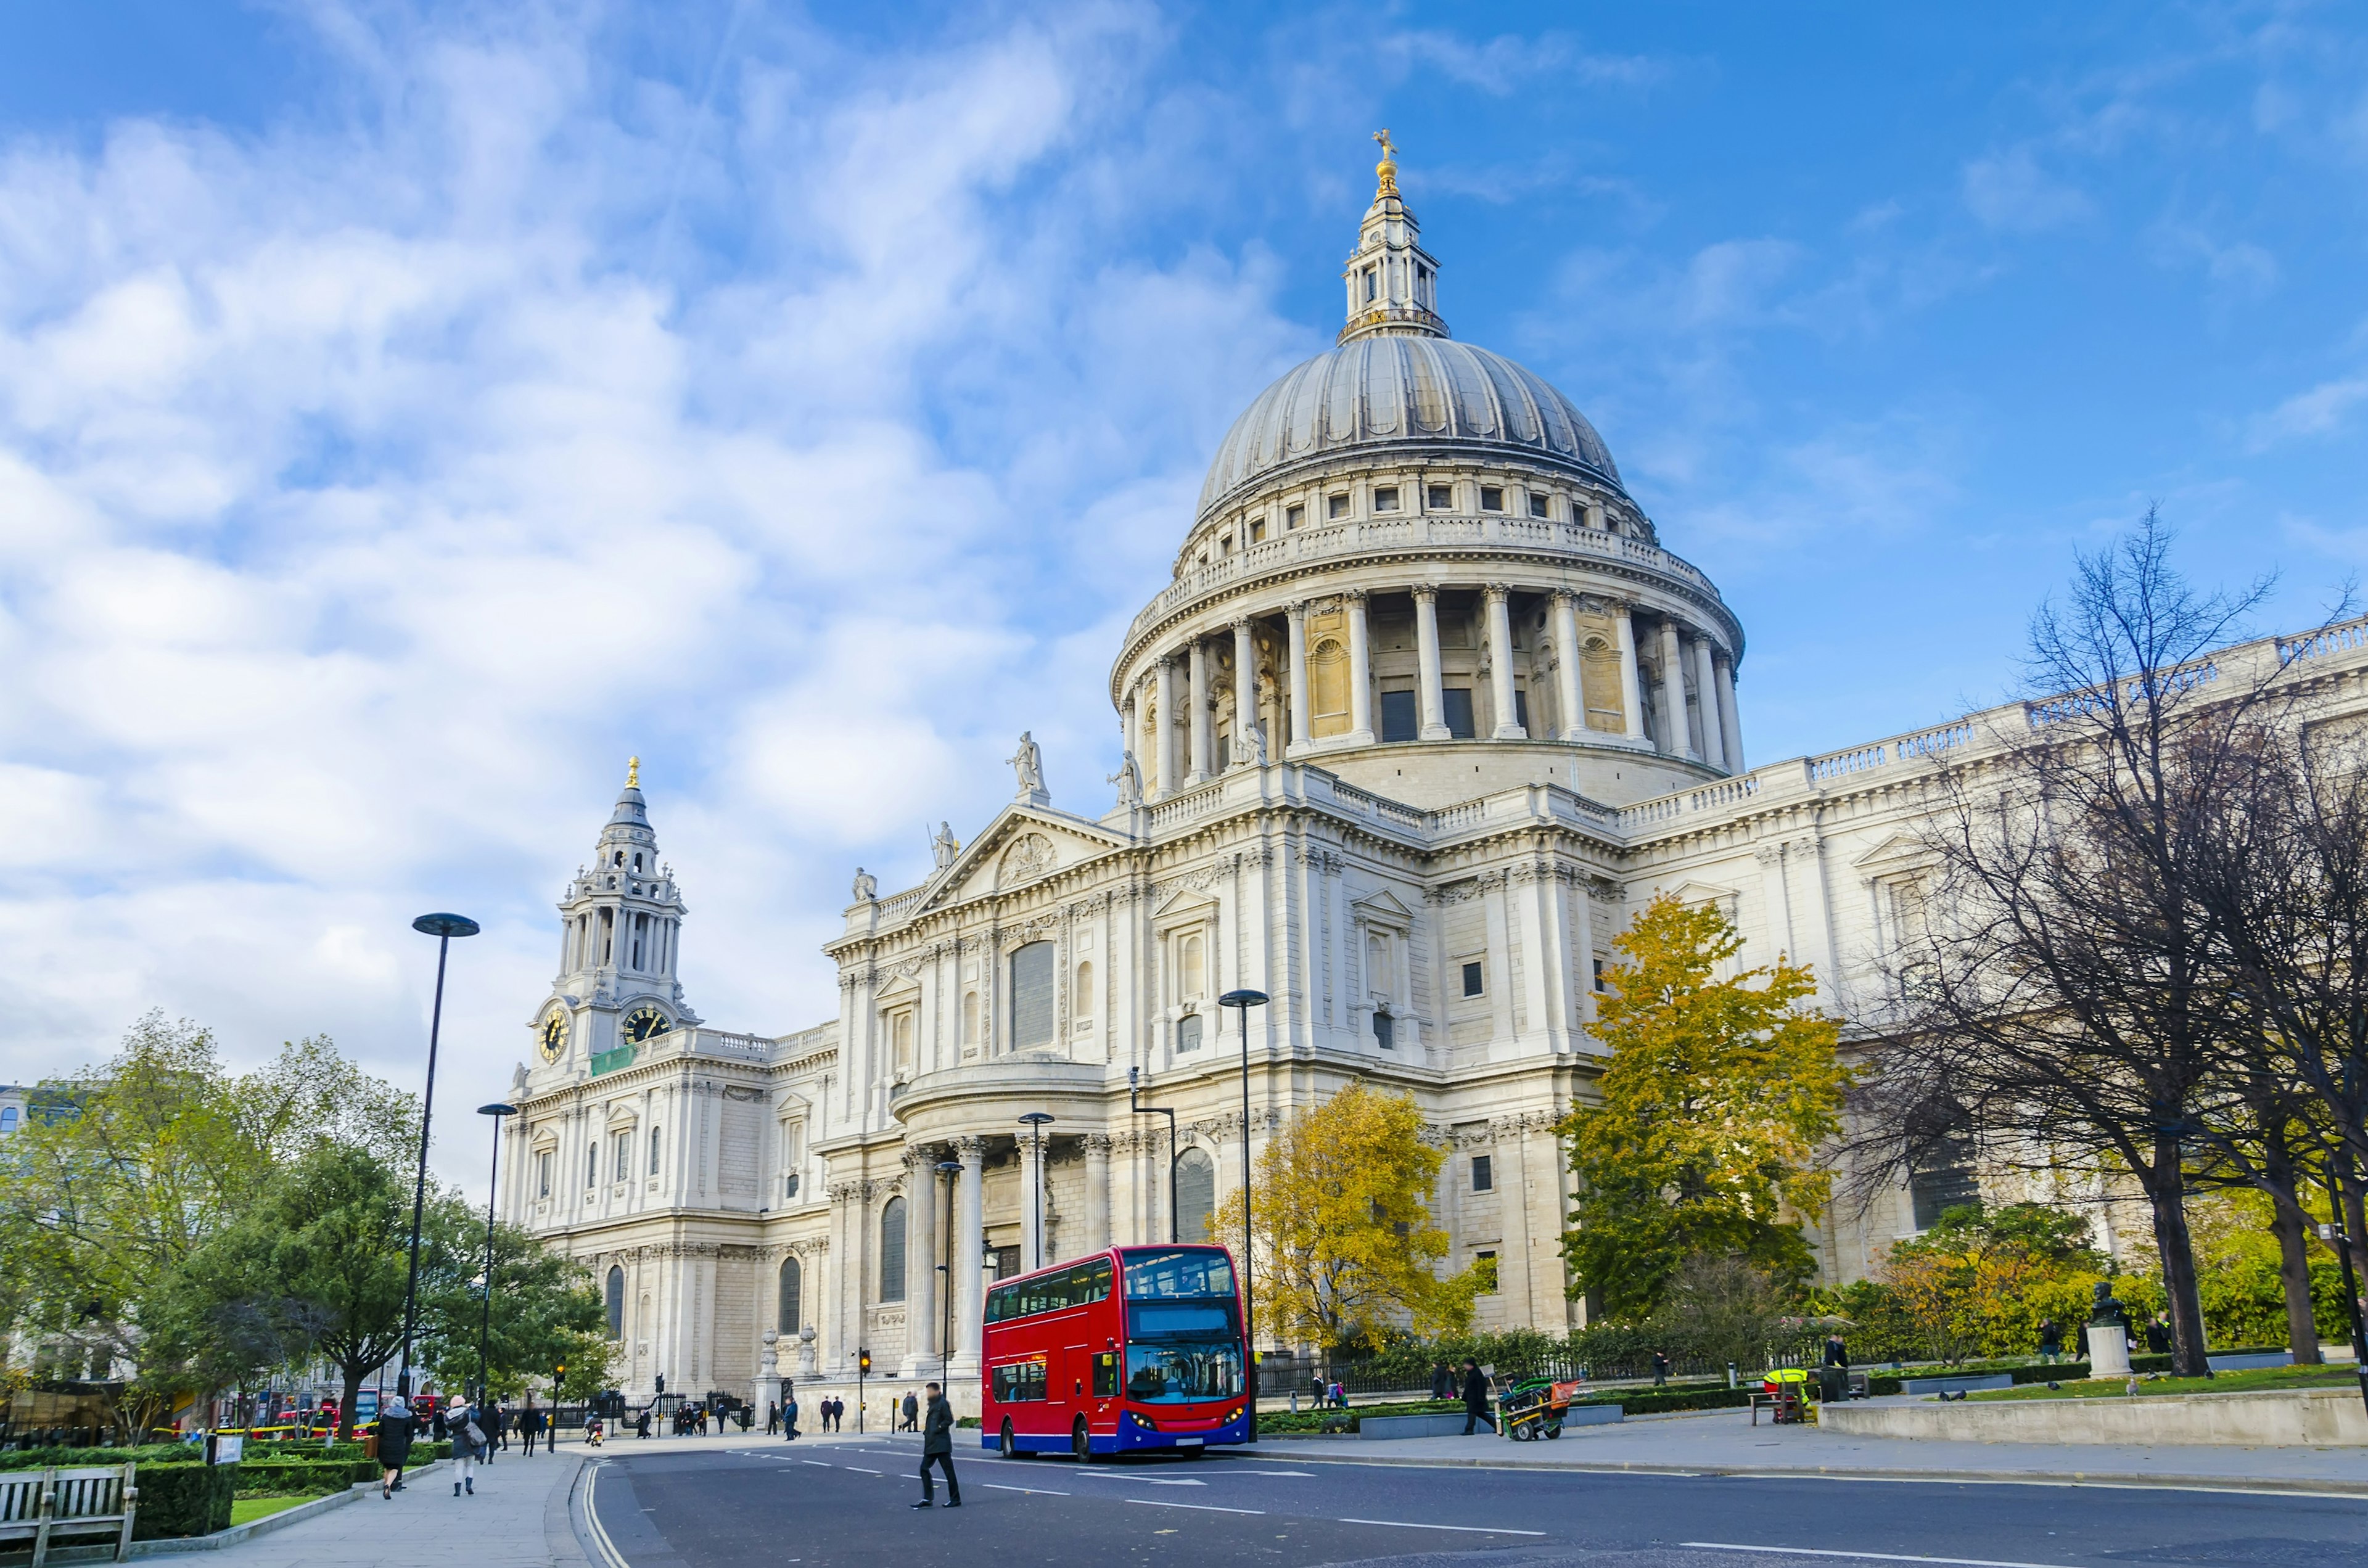 St. pauls cathedral with red double decker bus in London, United Kingdom